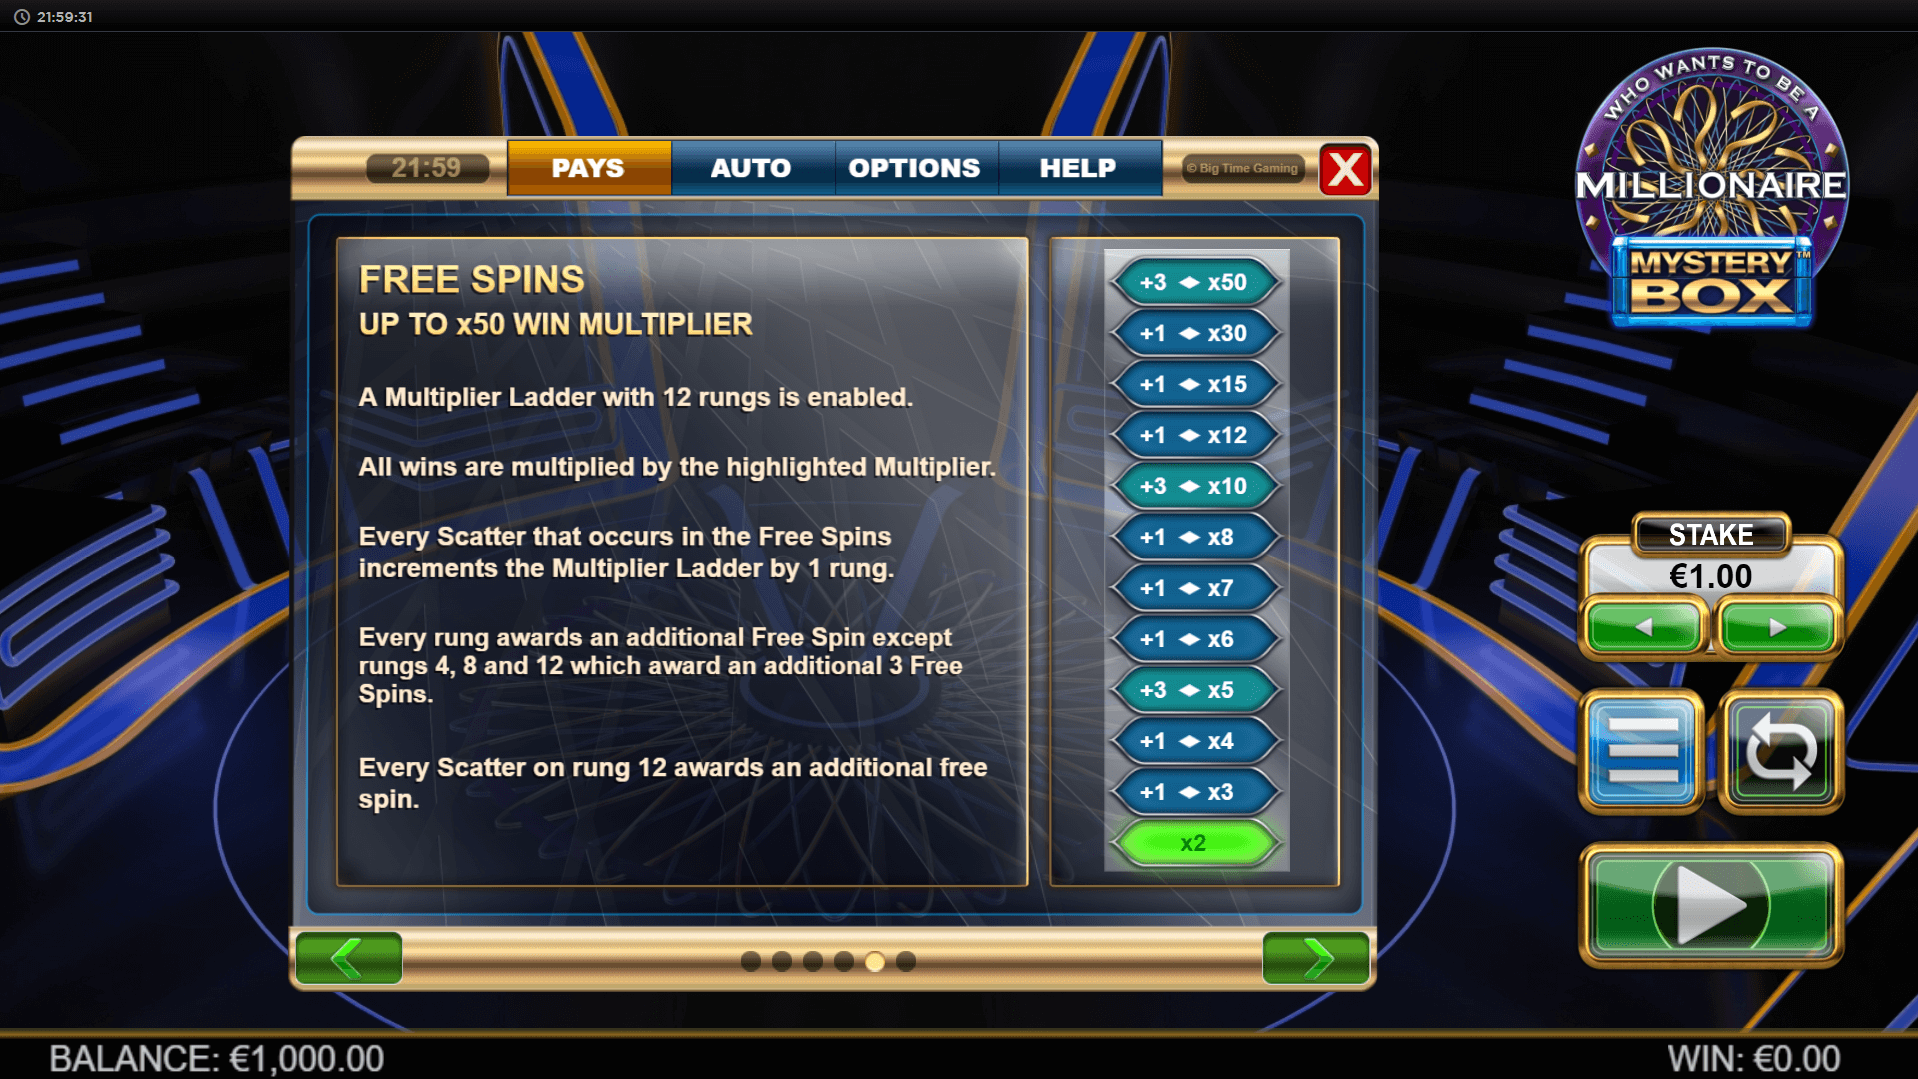 who wants to be a millionaire: mystery box slot machine detail image 4